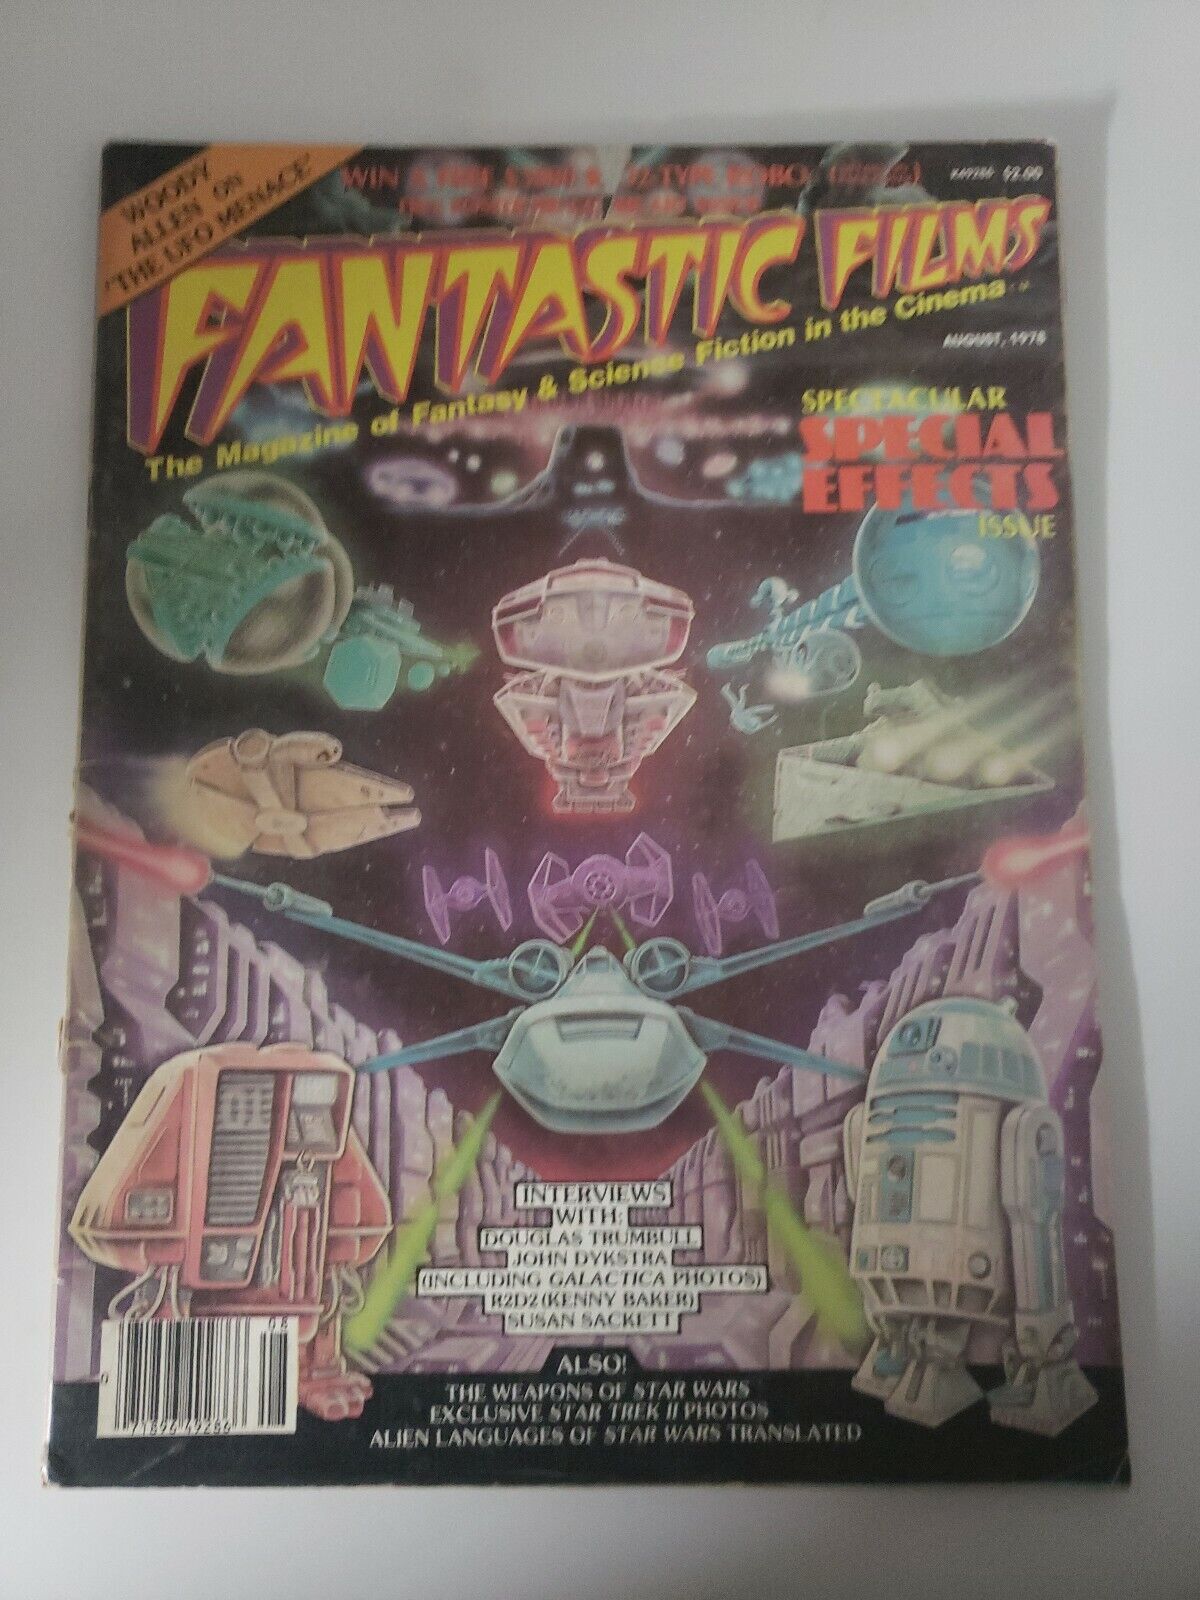 Fantastic Films, August 1978 Vintage Special Effects Issue Star Wars